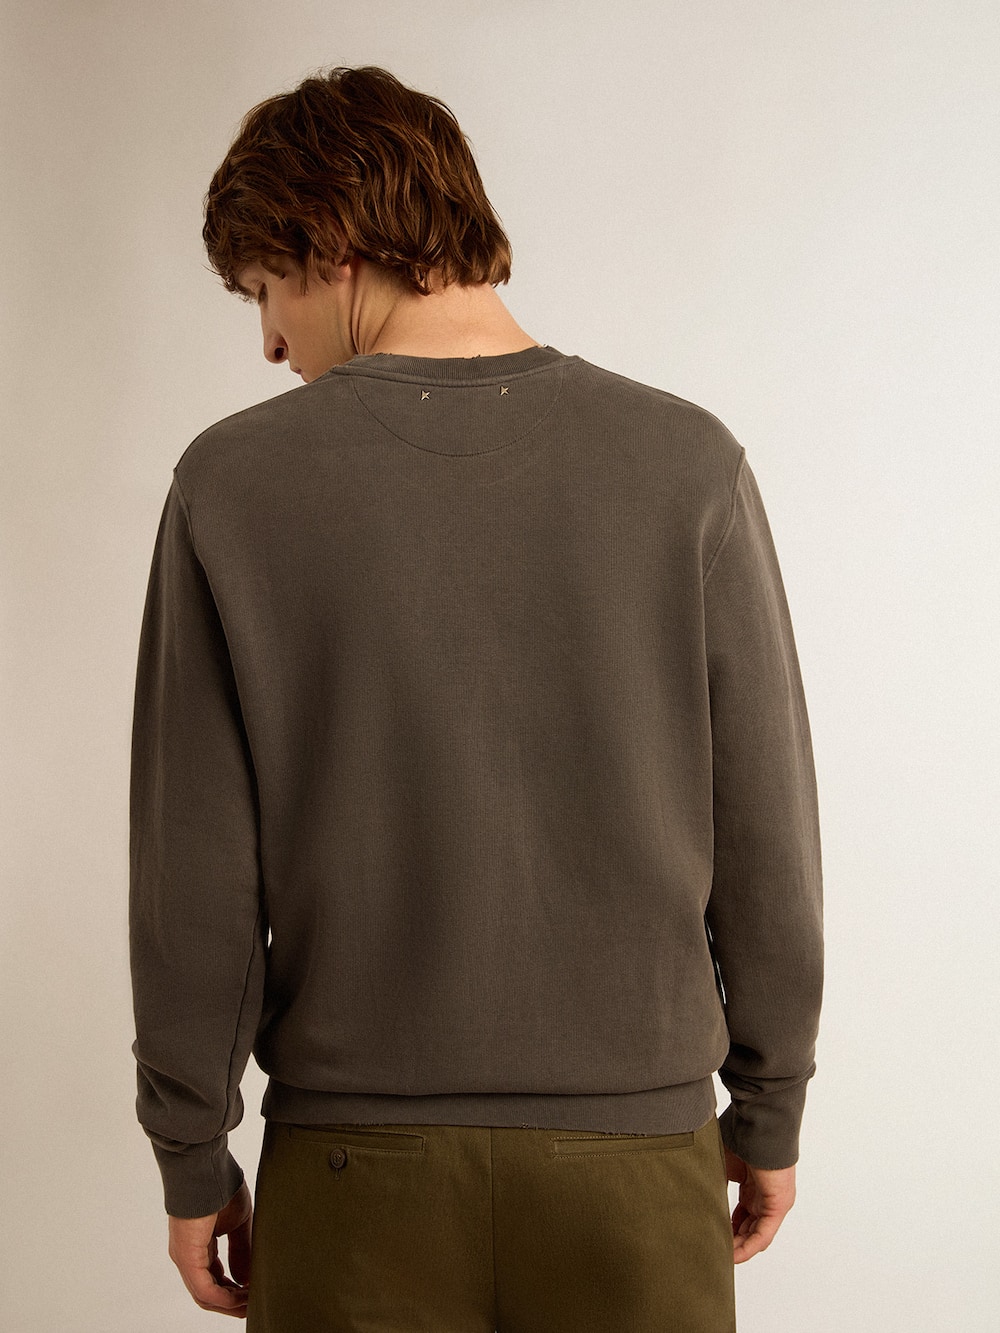 Golden Goose - Men's gray sweatshirt with logo and distressed treatment in 